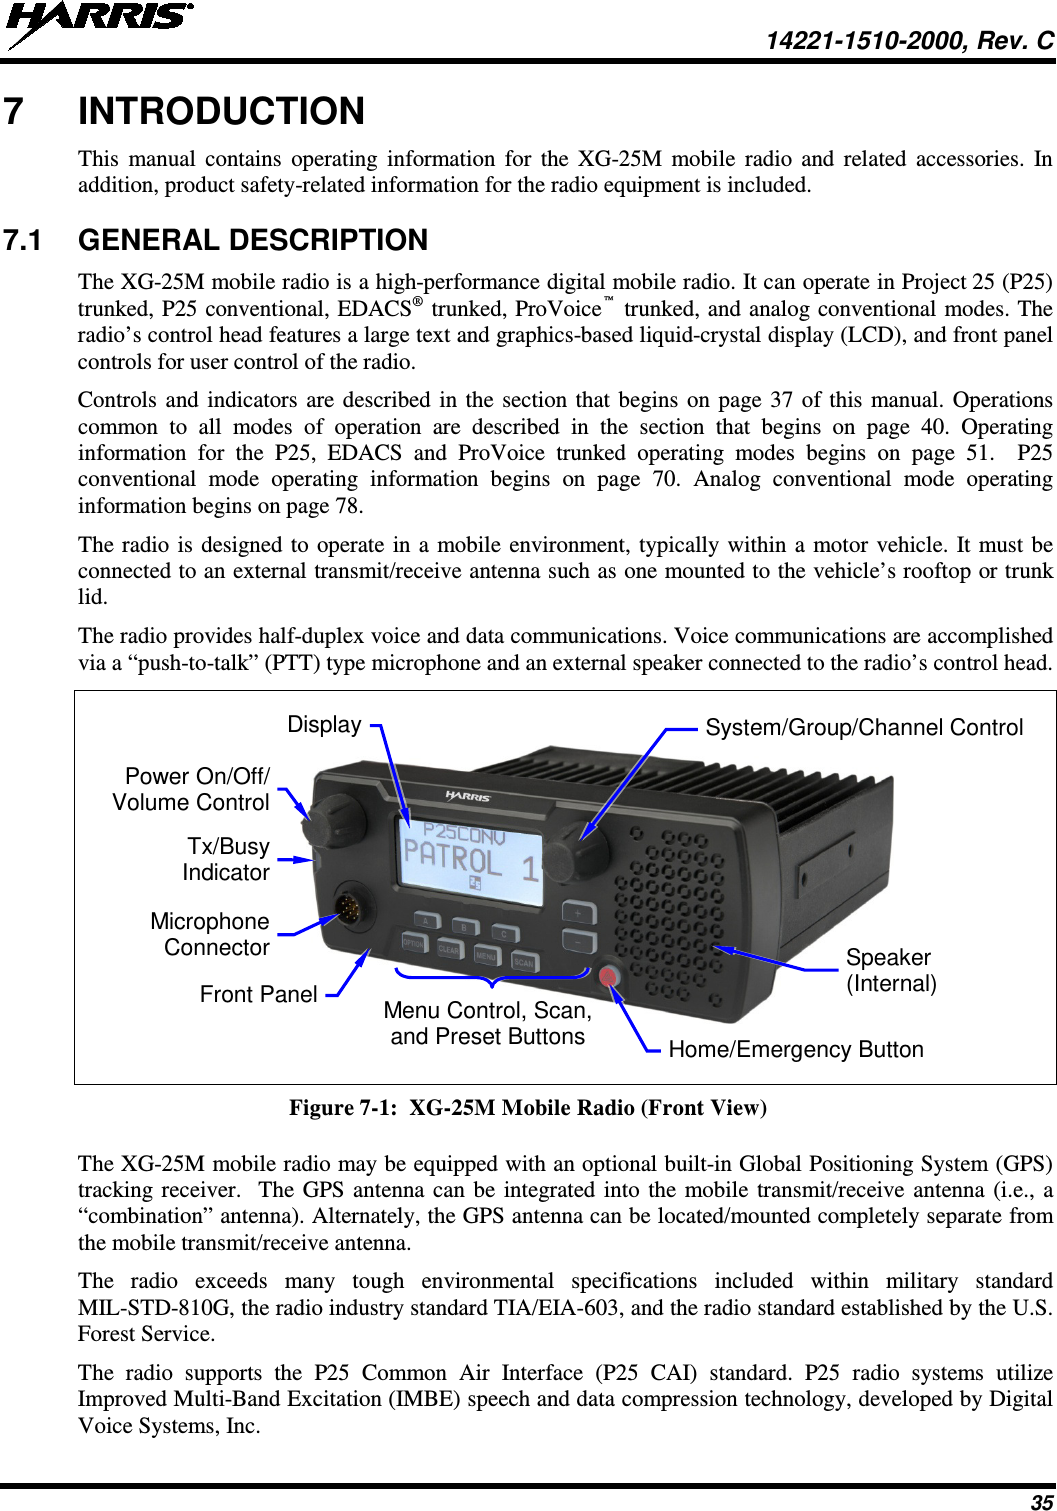  14221-1510-2000, Rev. C 35 7  INTRODUCTION This manual contains operating  information for the XG-25M mobile radio and related accessories. In addition, product safety-related information for the radio equipment is included. 7.1 GENERAL DESCRIPTION The XG-25M mobile radio is a high-performance digital mobile radio. It can operate in Project 25 (P25) trunked, P25 conventional, EDACS® trunked, ProVoice™ trunked, and analog conventional modes. The radio’s control head features a large text and graphics-based liquid-crystal display (LCD), and front panel controls for user control of the radio. Controls and indicators are described in the section that begins on page 37 of this manual. Operations common to all modes of operation are described in the section that begins on page 40.  Operating information  for the P25,  EDACS  and  ProVoice  trunked operating modes  begins  on page 51.    P25 conventional mode operating information  begins  on page 70.  Analog conventional mode operating information begins on page 78. The radio is designed to operate in a mobile environment, typically within a motor vehicle. It must be connected to an external transmit/receive antenna such as one mounted to the vehicle’s rooftop or trunk lid. The radio provides half-duplex voice and data communications. Voice communications are accomplished via a “push-to-talk” (PTT) type microphone and an external speaker connected to the radio’s control head.       Figure 7-1:  XG-25M Mobile Radio (Front View)  The XG-25M mobile radio may be equipped with an optional built-in Global Positioning System (GPS) tracking receiver.  The GPS antenna can be integrated into the mobile transmit/receive antenna (i.e., a “combination” antenna). Alternately, the GPS antenna can be located/mounted completely separate from the mobile transmit/receive antenna.  The  radio  exceeds  many  tough environmental specifications included within military standard MIL-STD-810G, the radio industry standard TIA/EIA-603, and the radio standard established by the U.S. Forest Service. The radio supports the P25  Common Air Interface (P25 CAI) standard. P25 radio systems utilize Improved Multi-Band Excitation (IMBE) speech and data compression technology, developed by Digital Voice Systems, Inc.  Power On/Off/ Volume Control Microphone Connector Tx/Busy Indicator Speaker (Internal) Home/Emergency Button Menu Control, Scan, and Preset Buttons Front Panel System/Group/Channel Control Display 